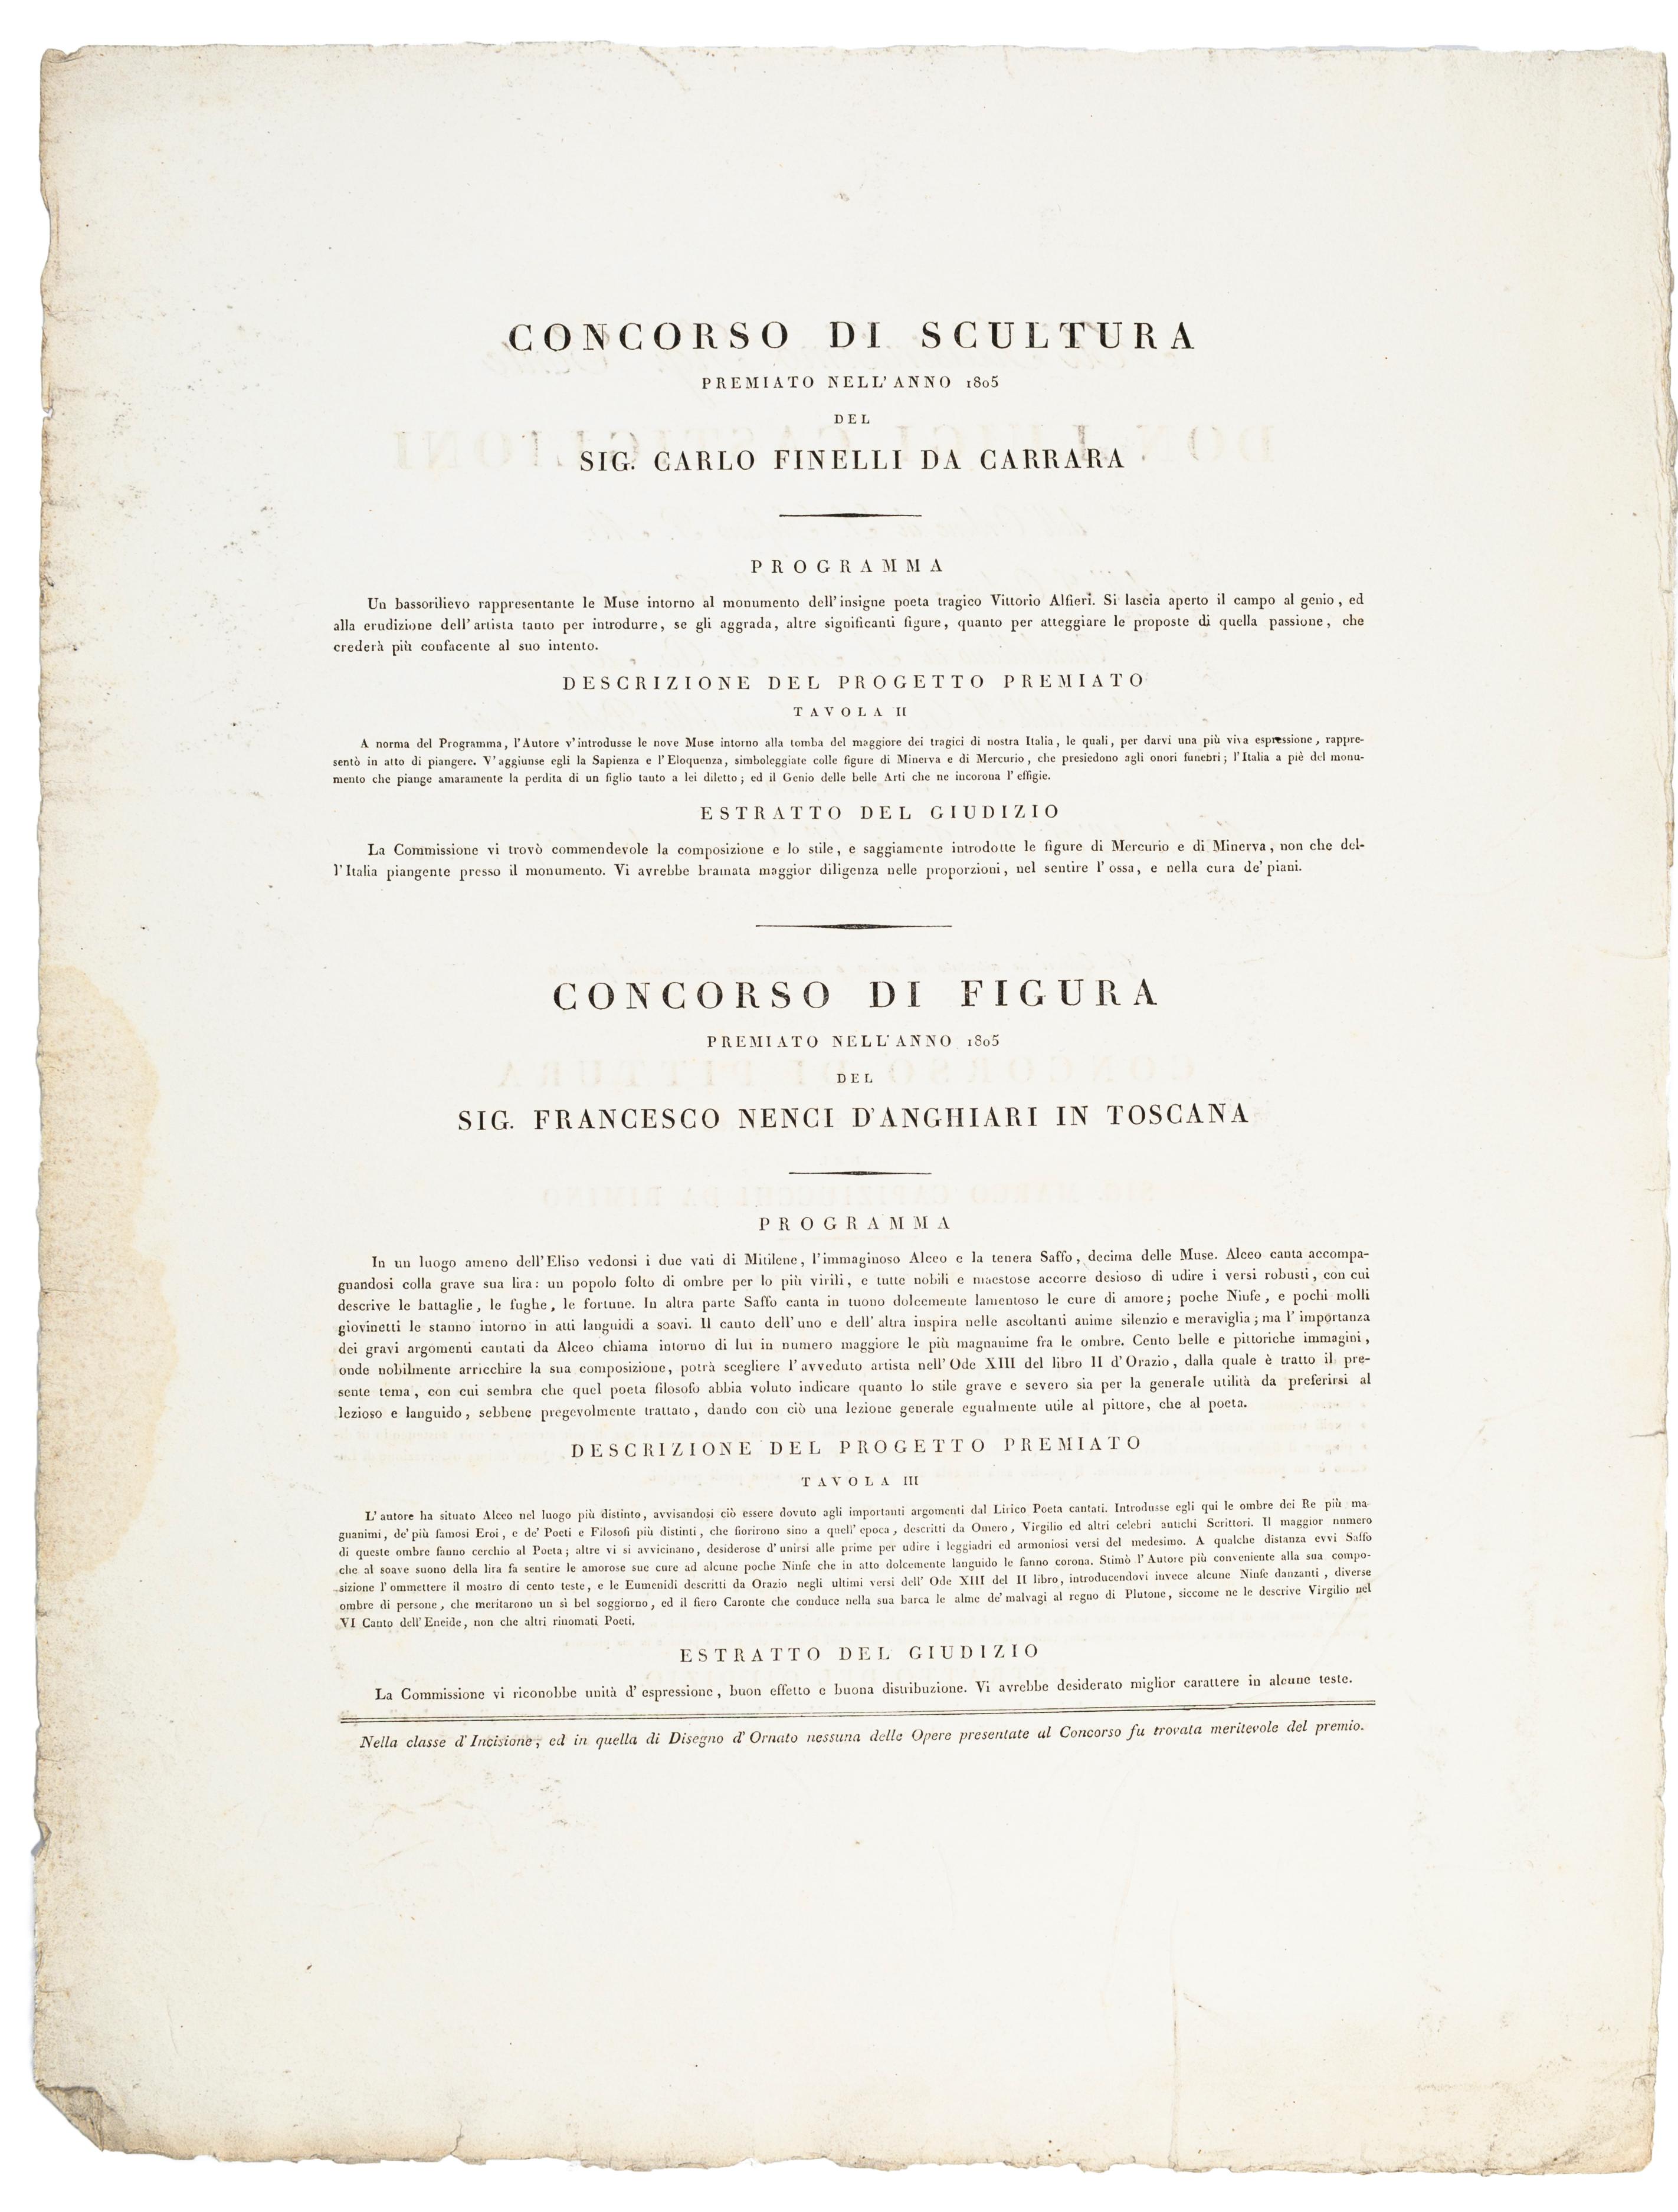 Opere dei Grandi Concorsi is a beautiful issue realized in 1805 by the Academy of Fine Art in Milan in the occasion of the prestigious artistic price: the Sculpture competition was winned by Carlo Finelli da Carrara,  the Drawing competition by